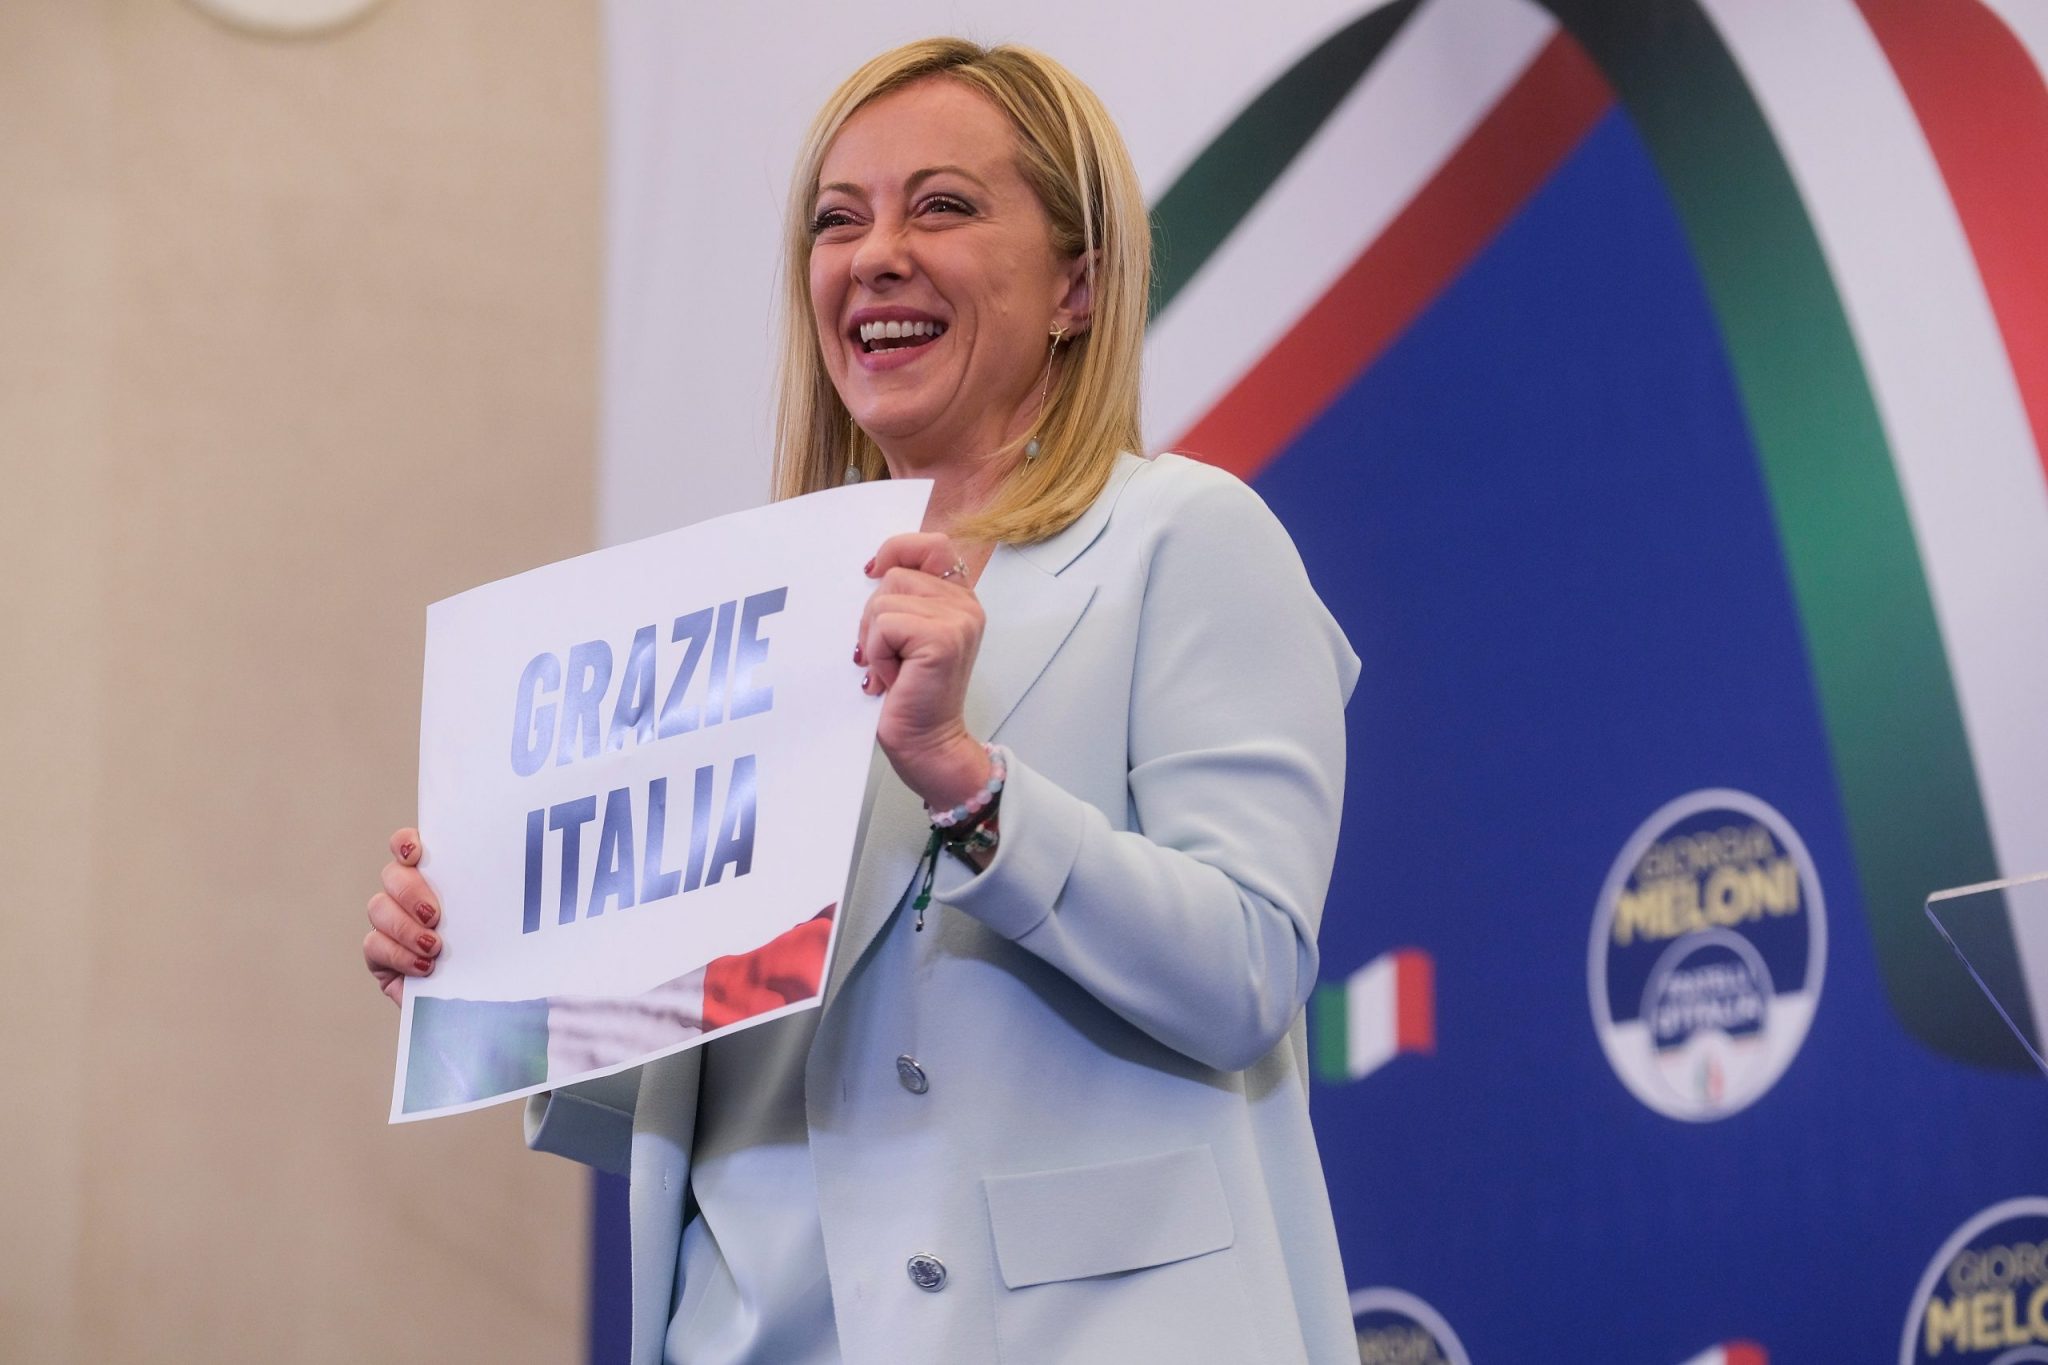 Rome, 26-09-2022, Giorgia Meloni wins Italian elections, fratelli d'italia is Italy's leading party, press conference